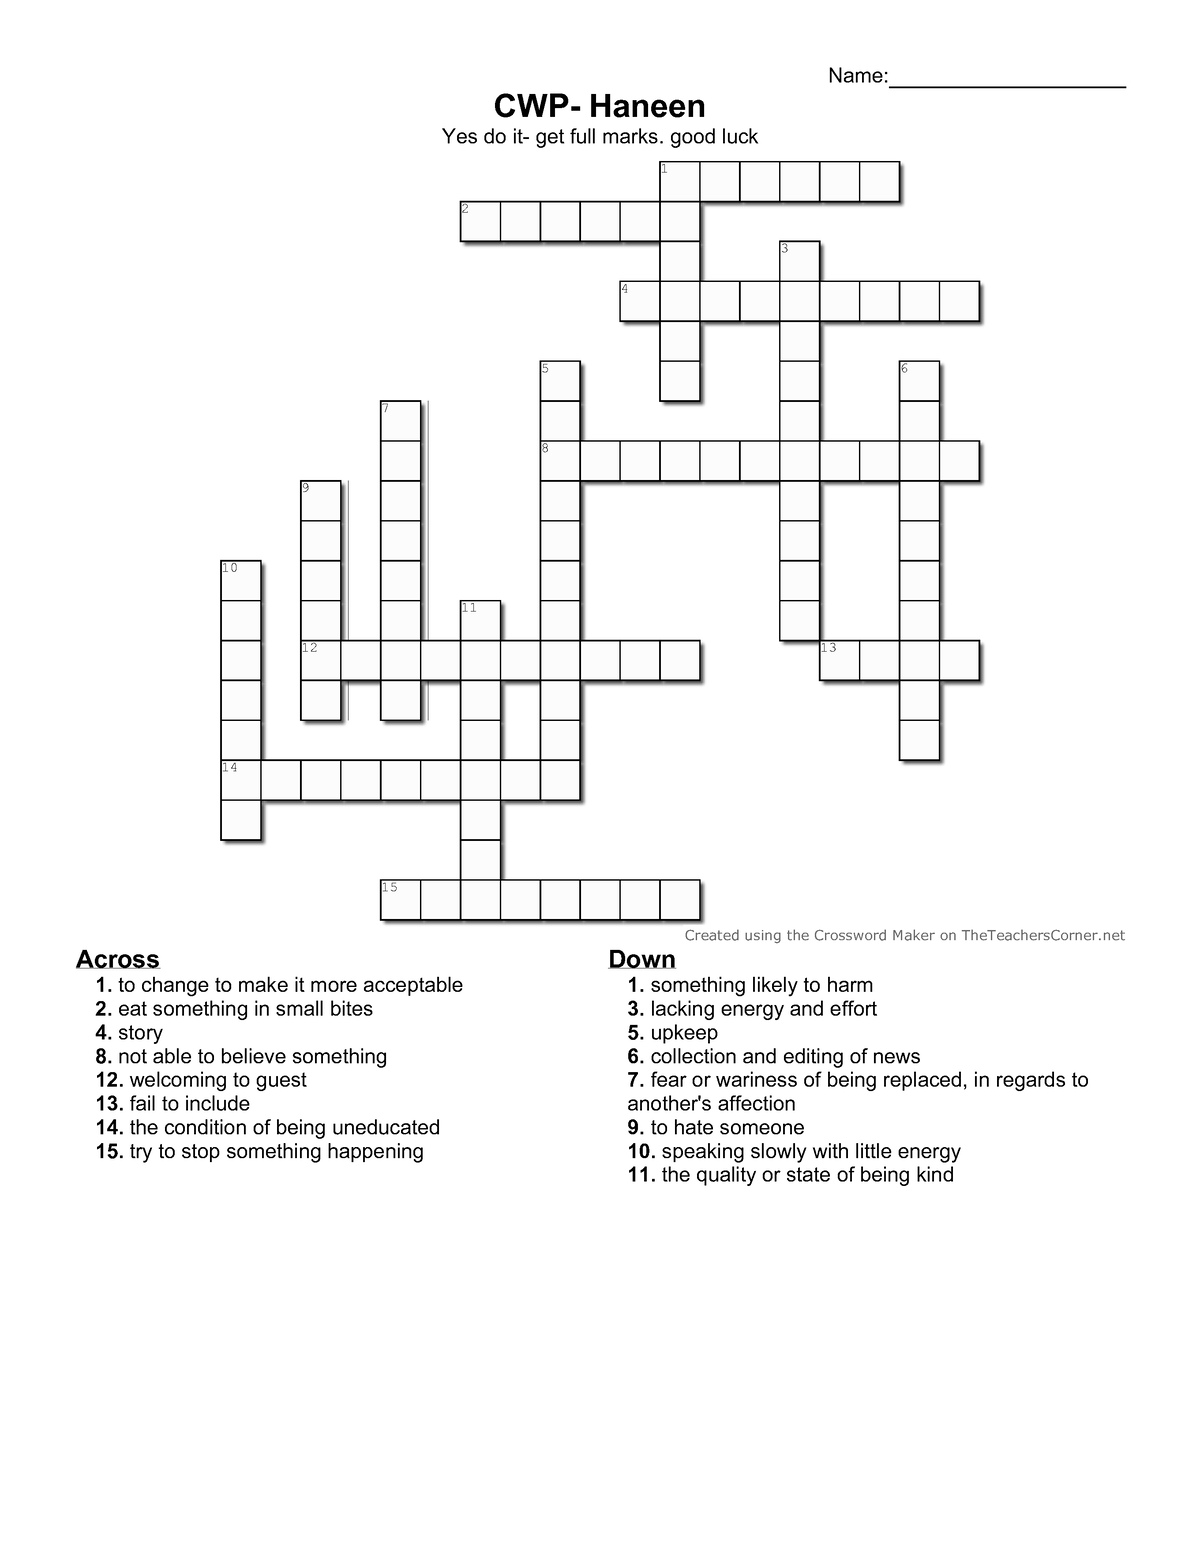 Crossword haneen English Down 1 something likely to harm 3